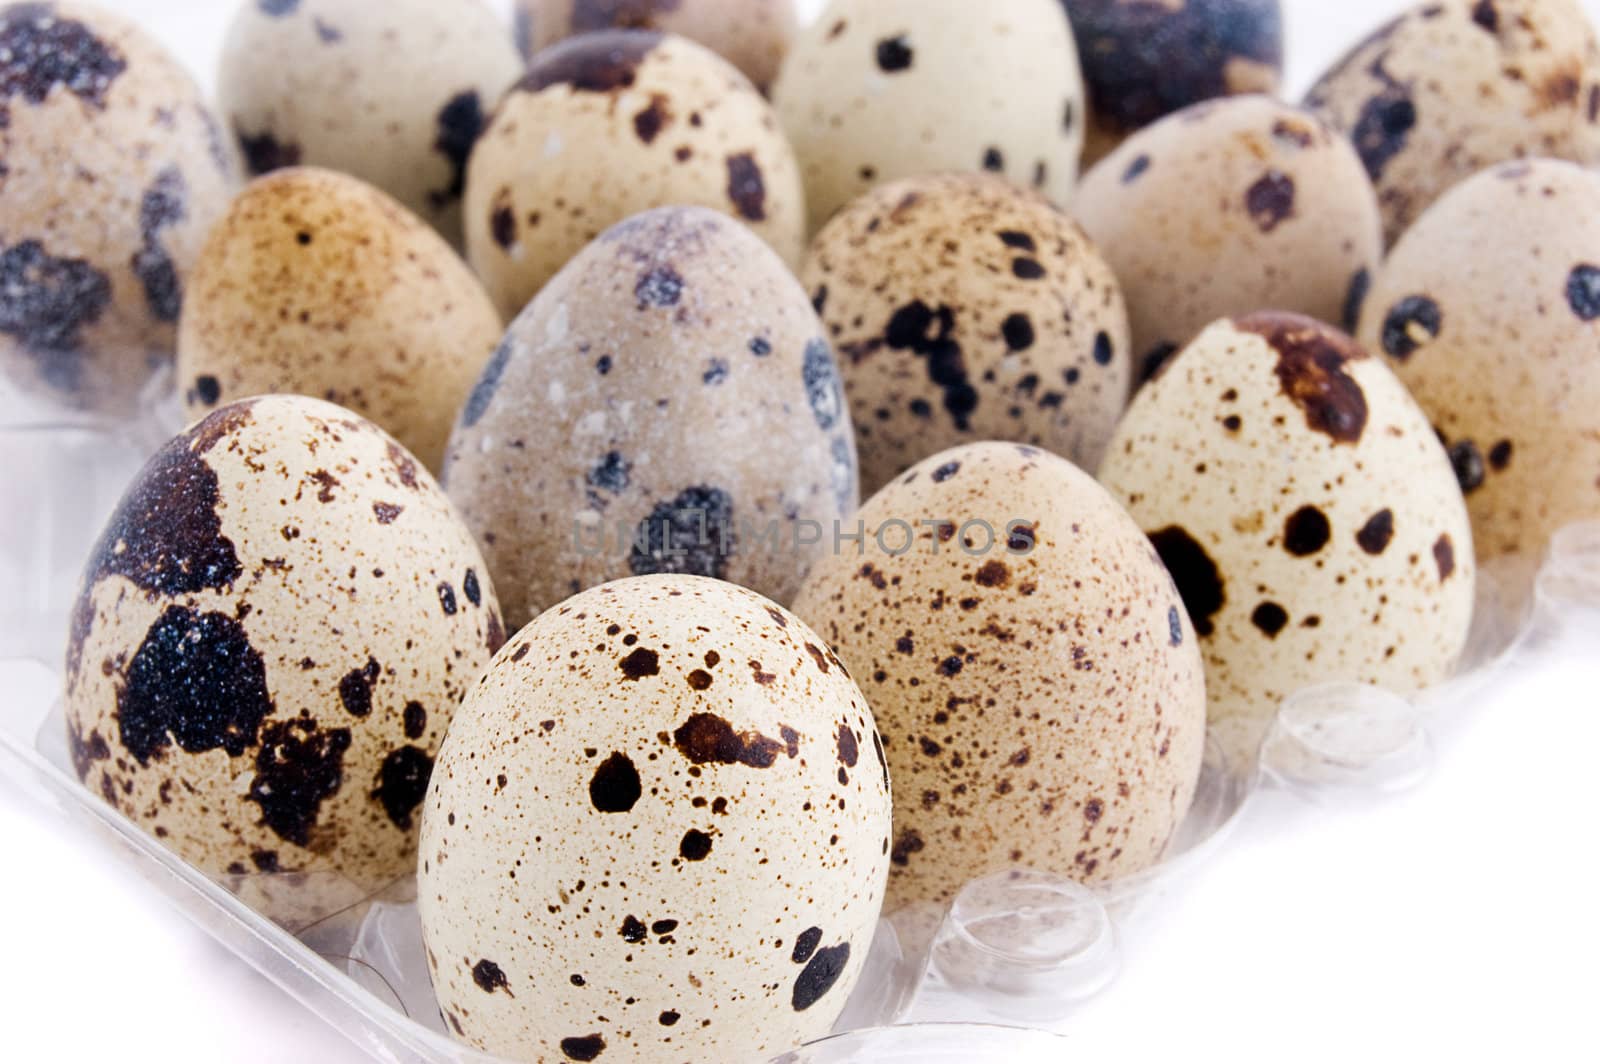 Quail eggs raw in tray over light back